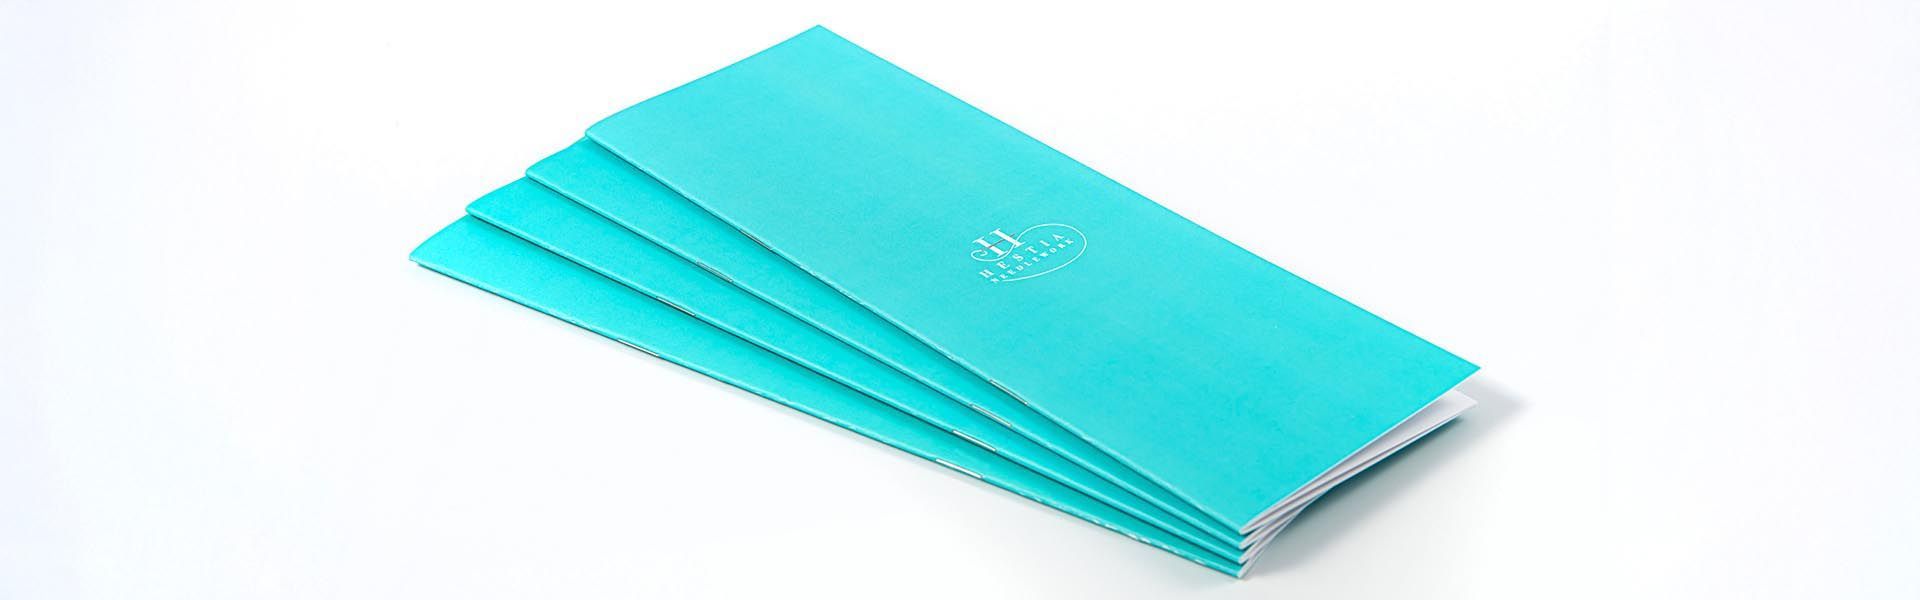 a stack of turquoise colored notebooks with the hestia needlework logo on the front